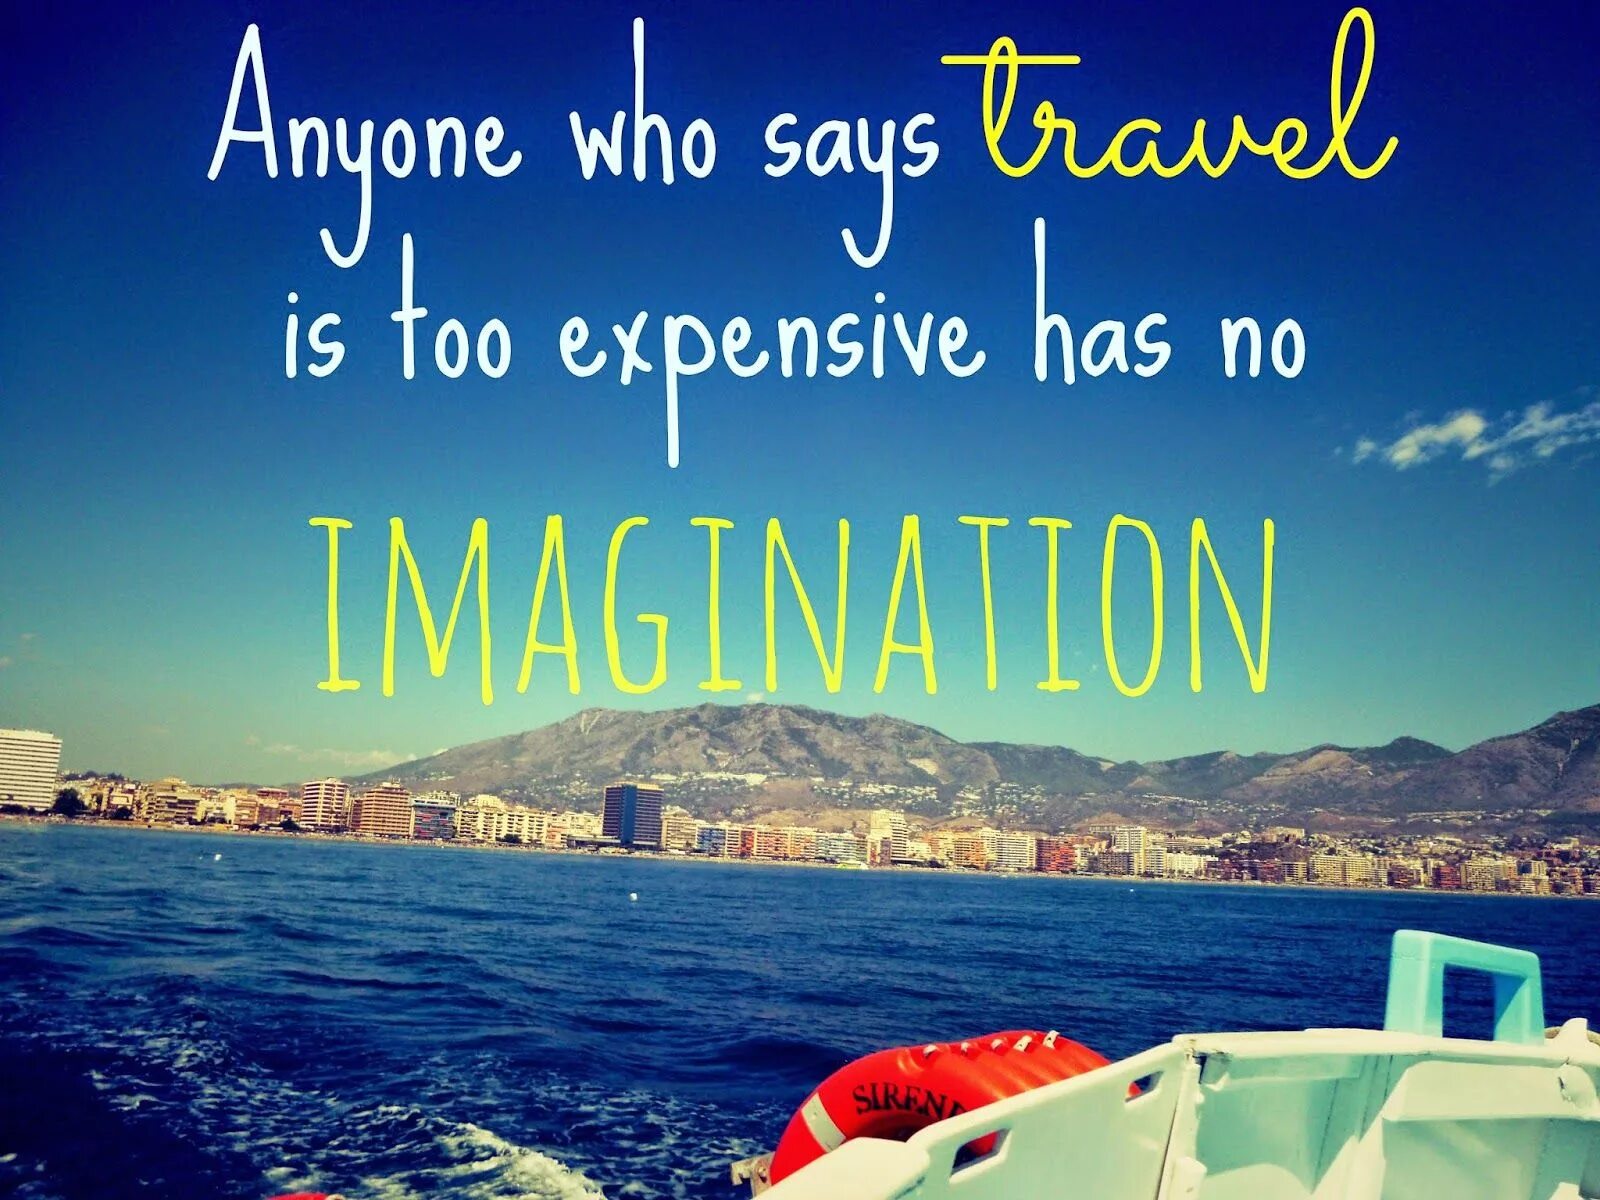 Travelling is expensive